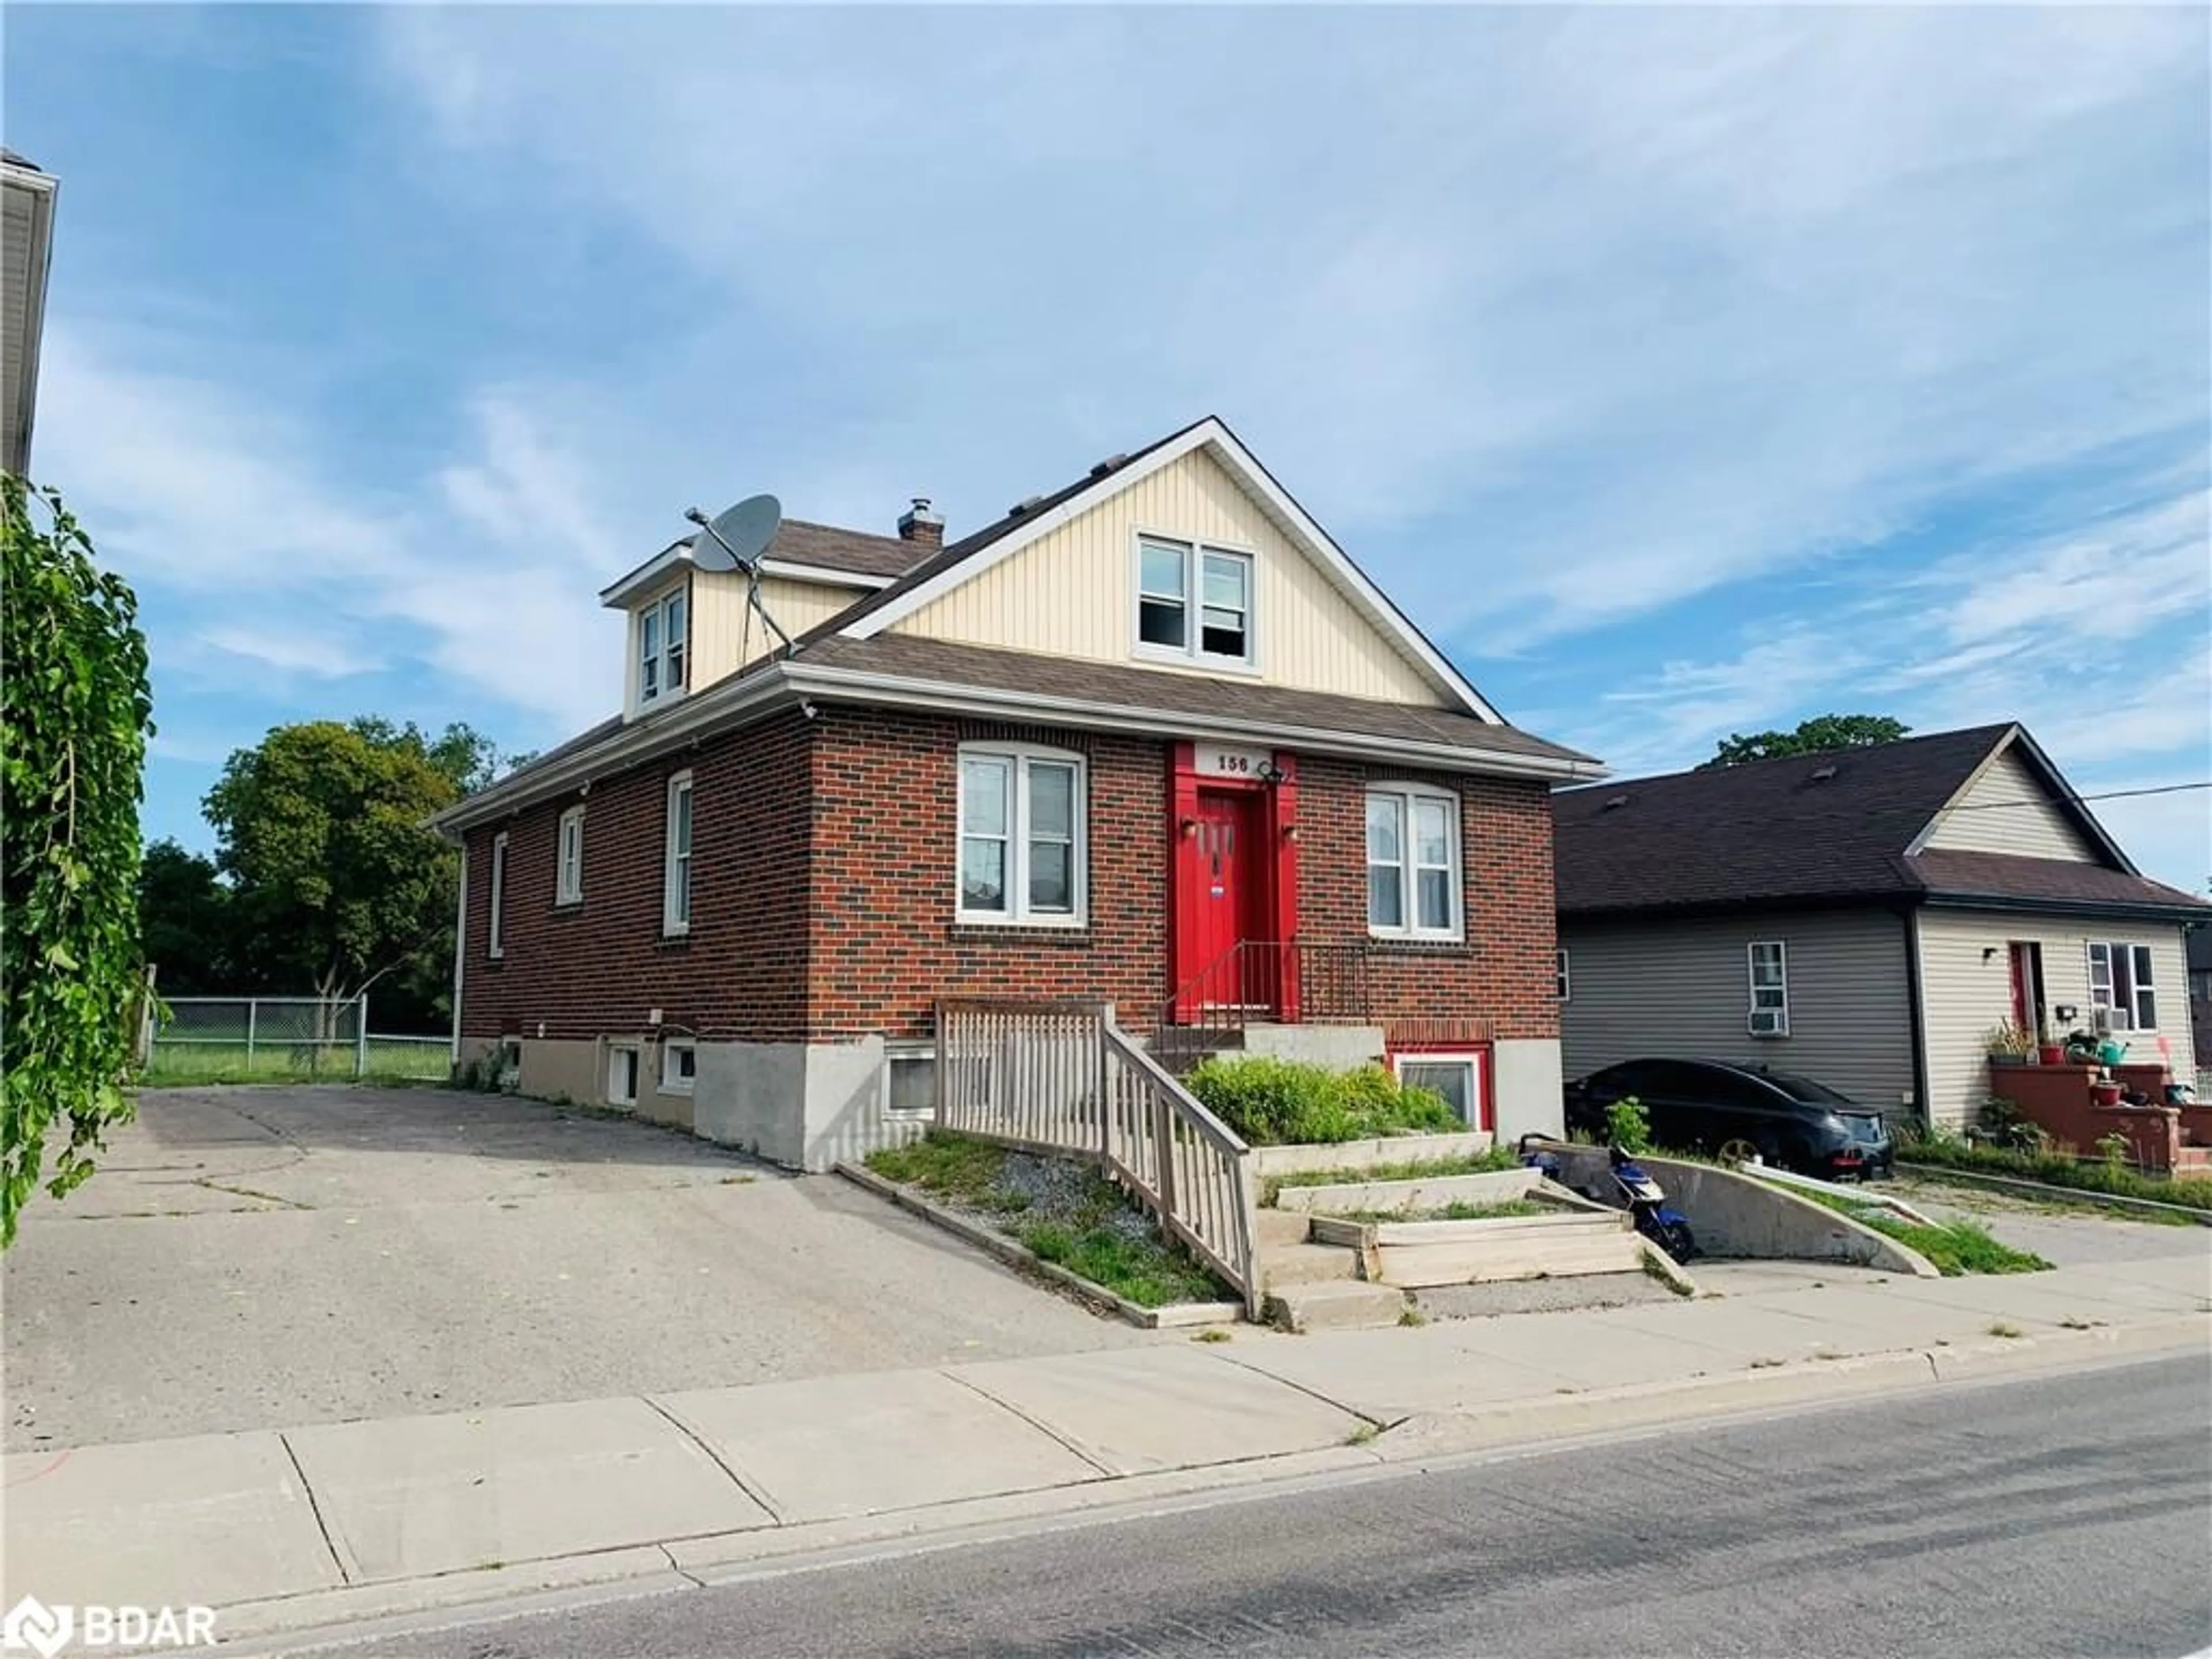 Frontside or backside of a home for 156 Dunlop St, Barrie Ontario L4N 1B2